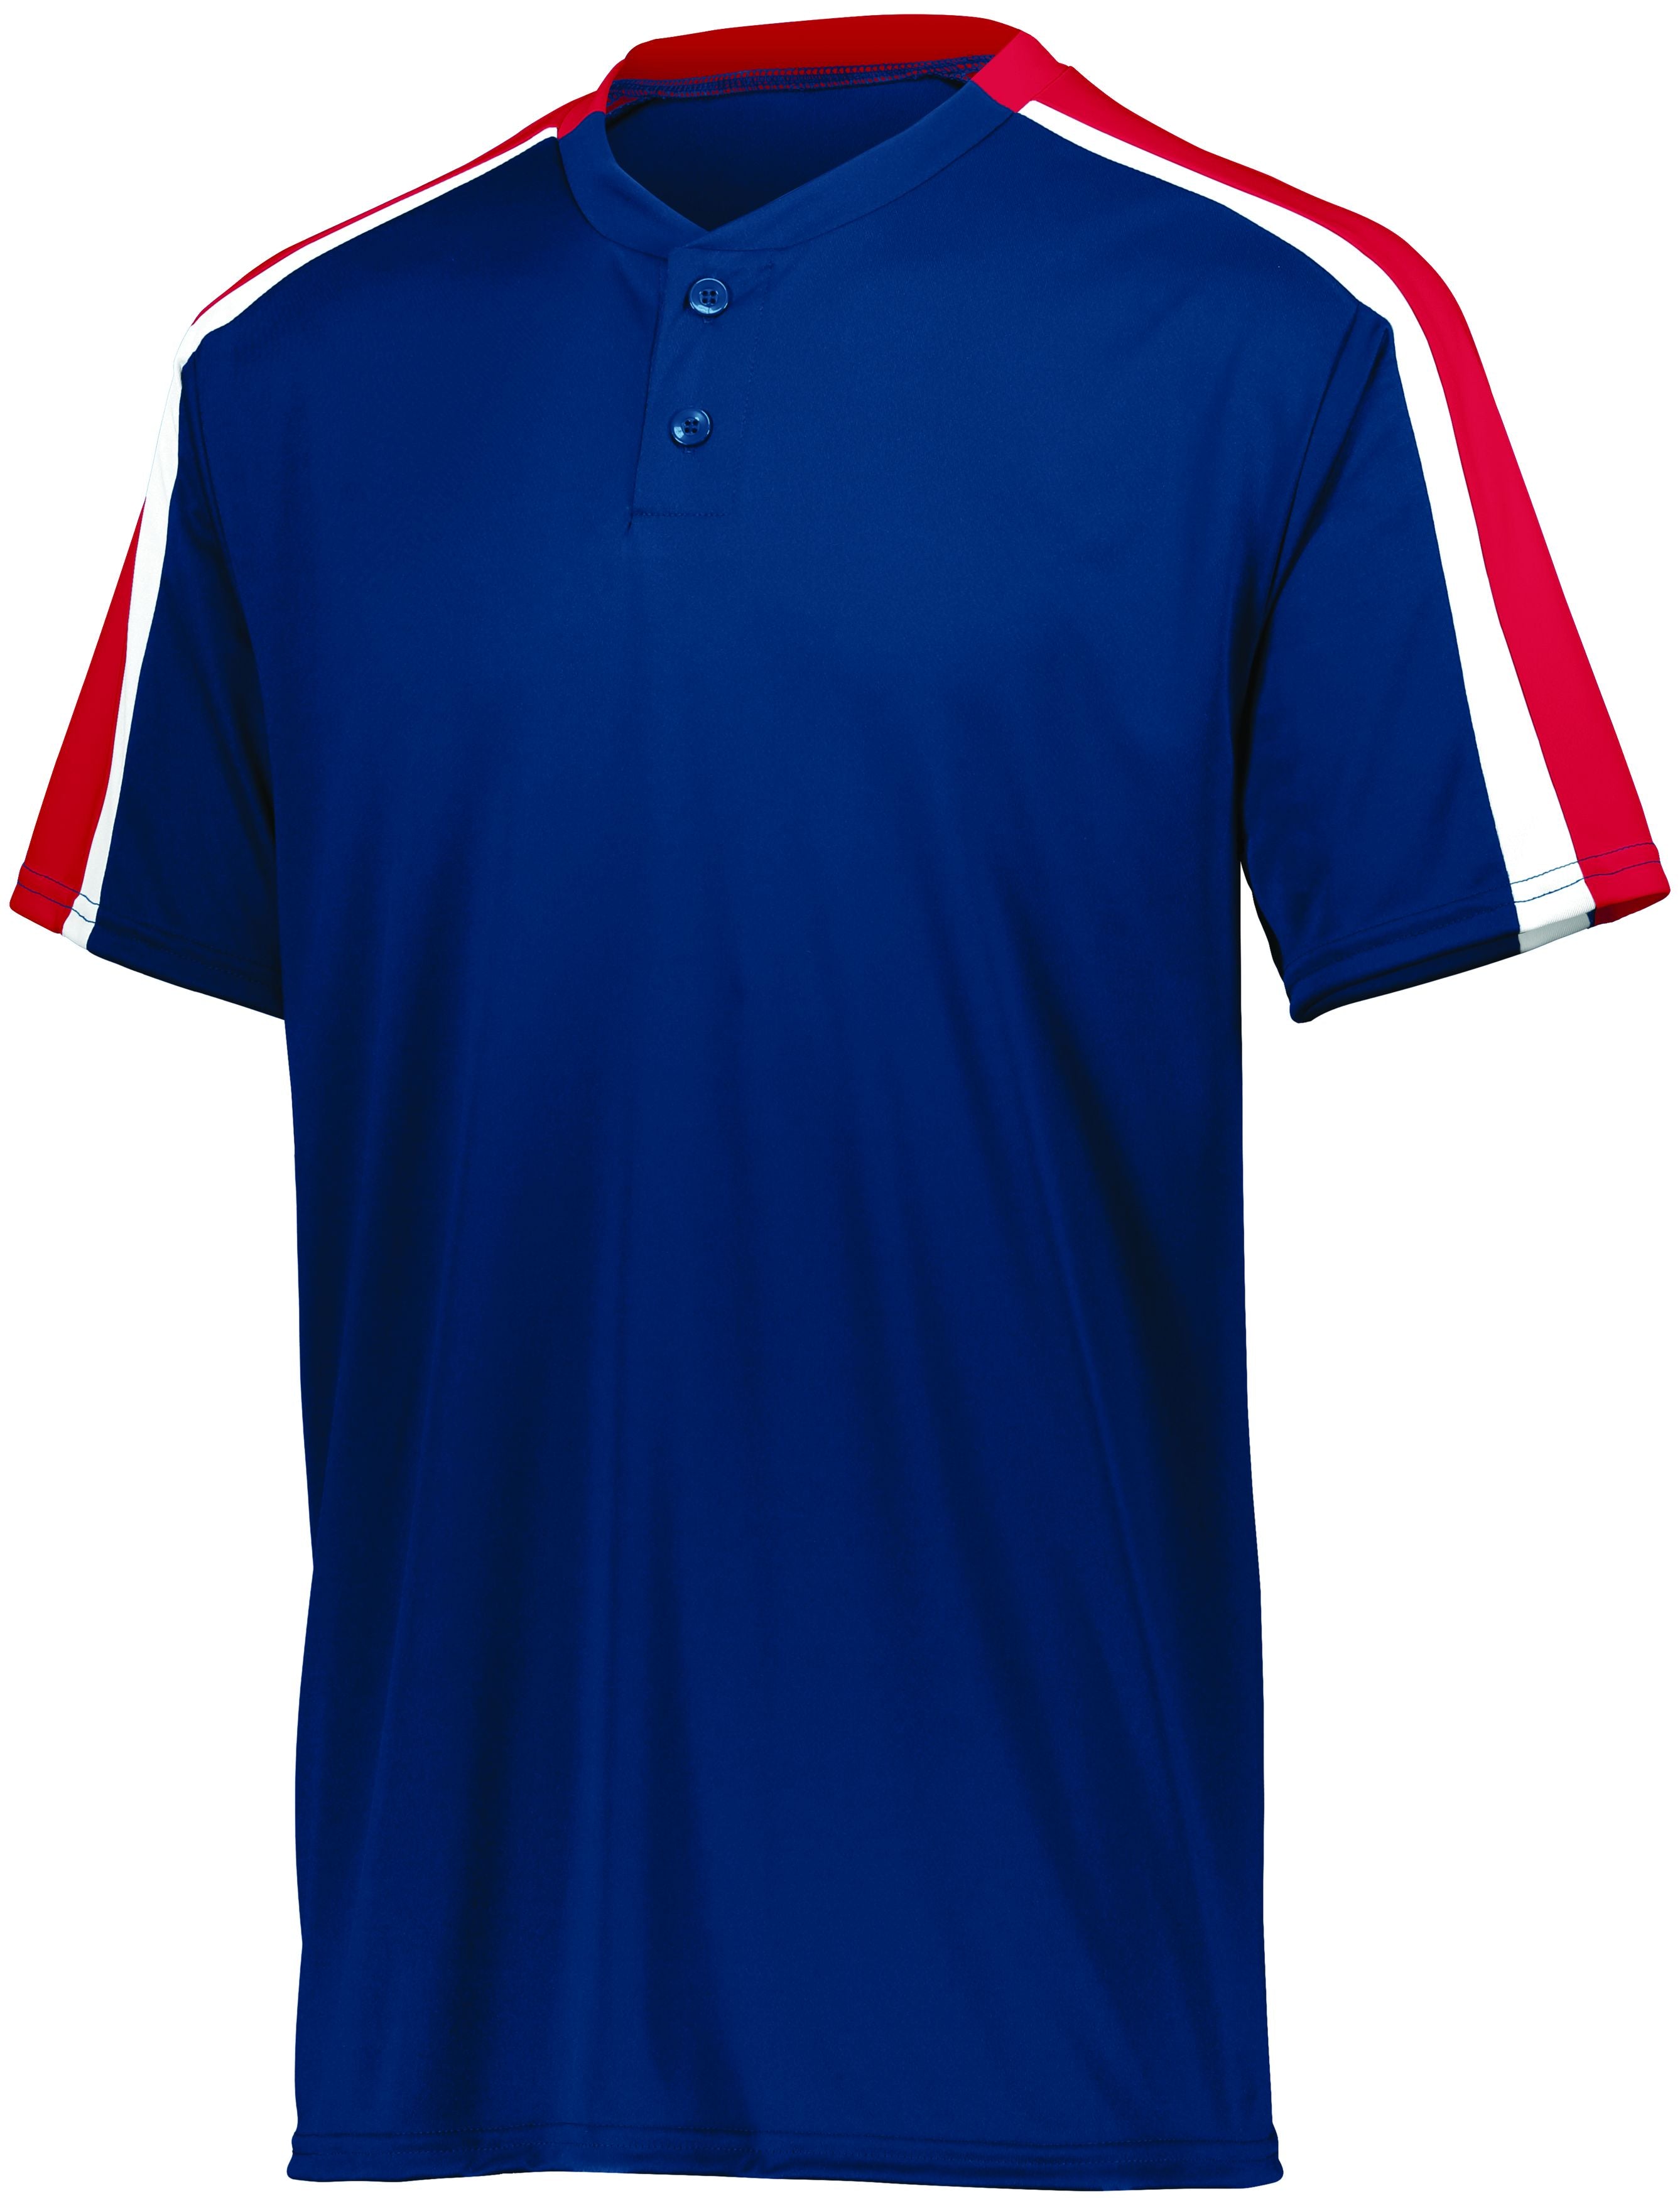 Augusta Sportswear Youth Power Plus Jersey 2.0 in Navy/Red/White  -Part of the Youth, Youth-Jersey, Augusta-Products, Baseball, Shirts, All-Sports, All-Sports-1 product lines at KanaleyCreations.com